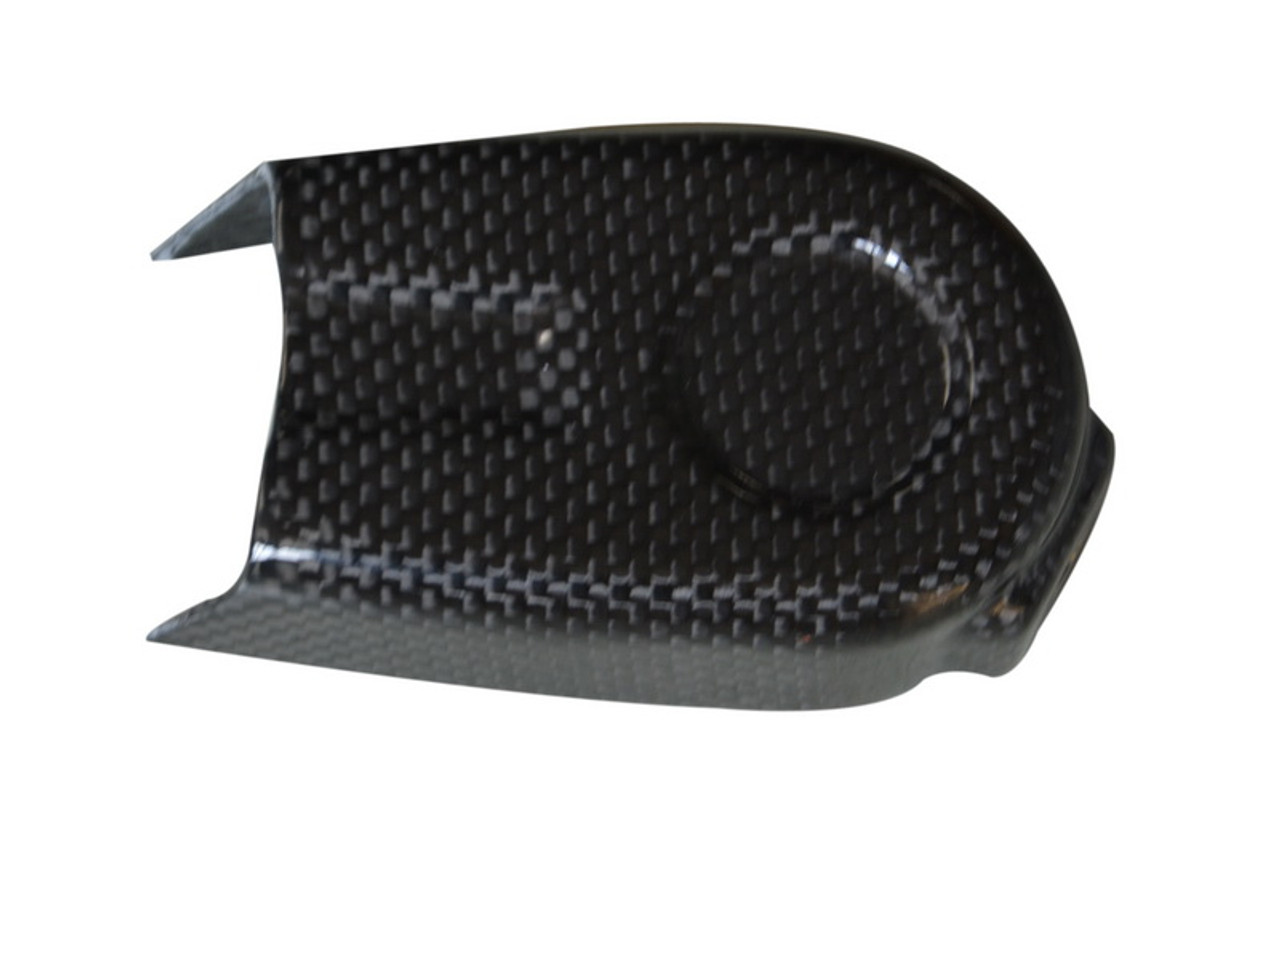 Exhaust Servo Cover (right side) in 100% Carbon Fiber for BMW R1200GS 2013-2018, R1250GS 2019-2021, ADV 2014-2021